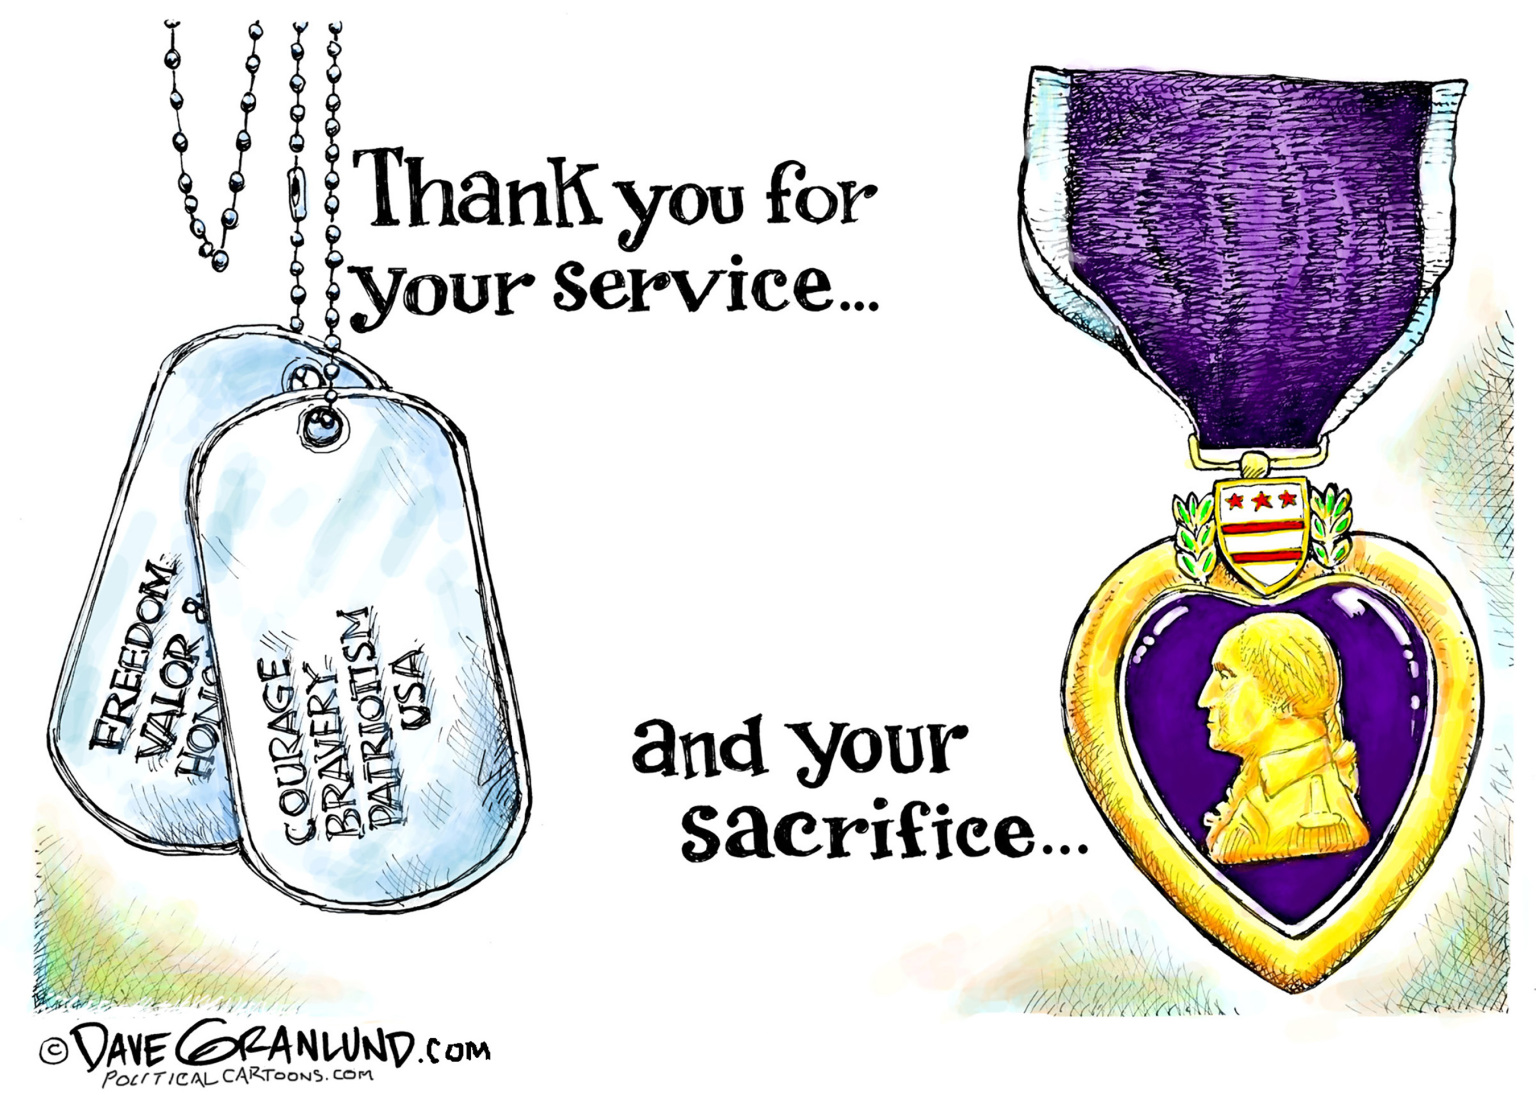 Veterans Service And Sacrifice - By Dave Granlund